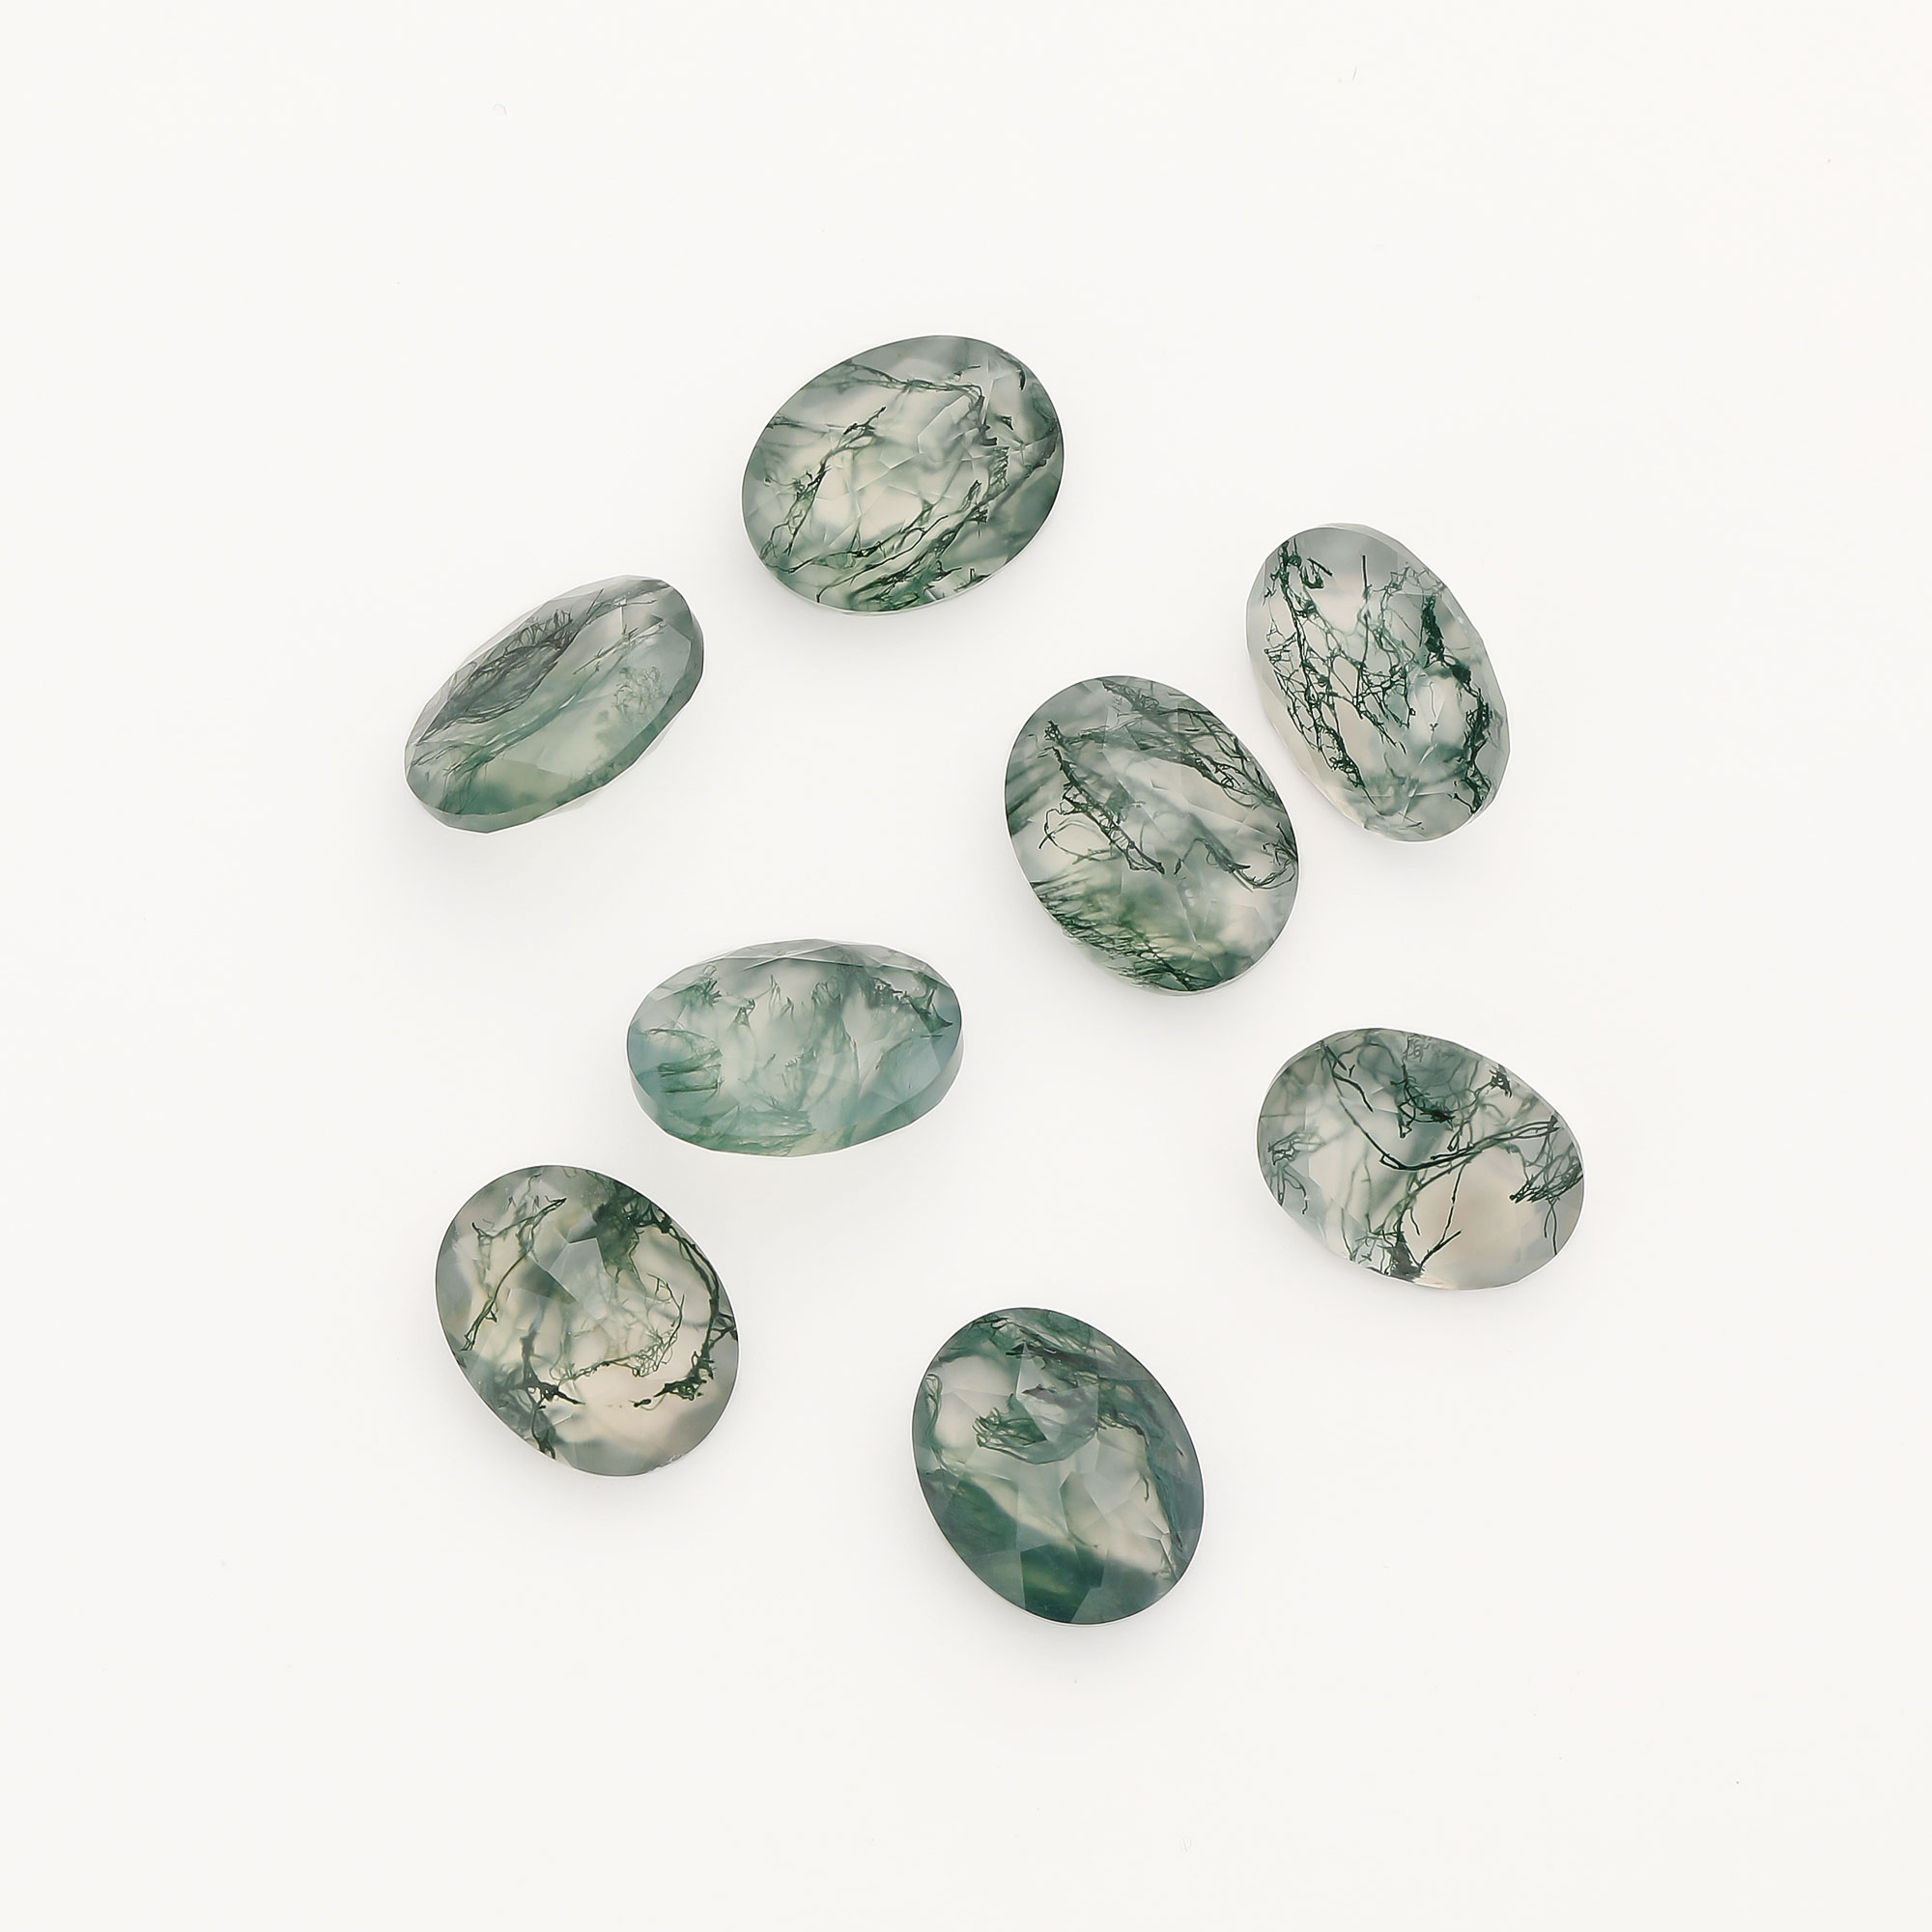 1Pcs 7x9MM Green Moss Agate Oval Faceted Nature Stone,Semi-precious Gemstone,Unique Gemstone,DIY Jewelry Supplies 4120143 - Click Image to Close